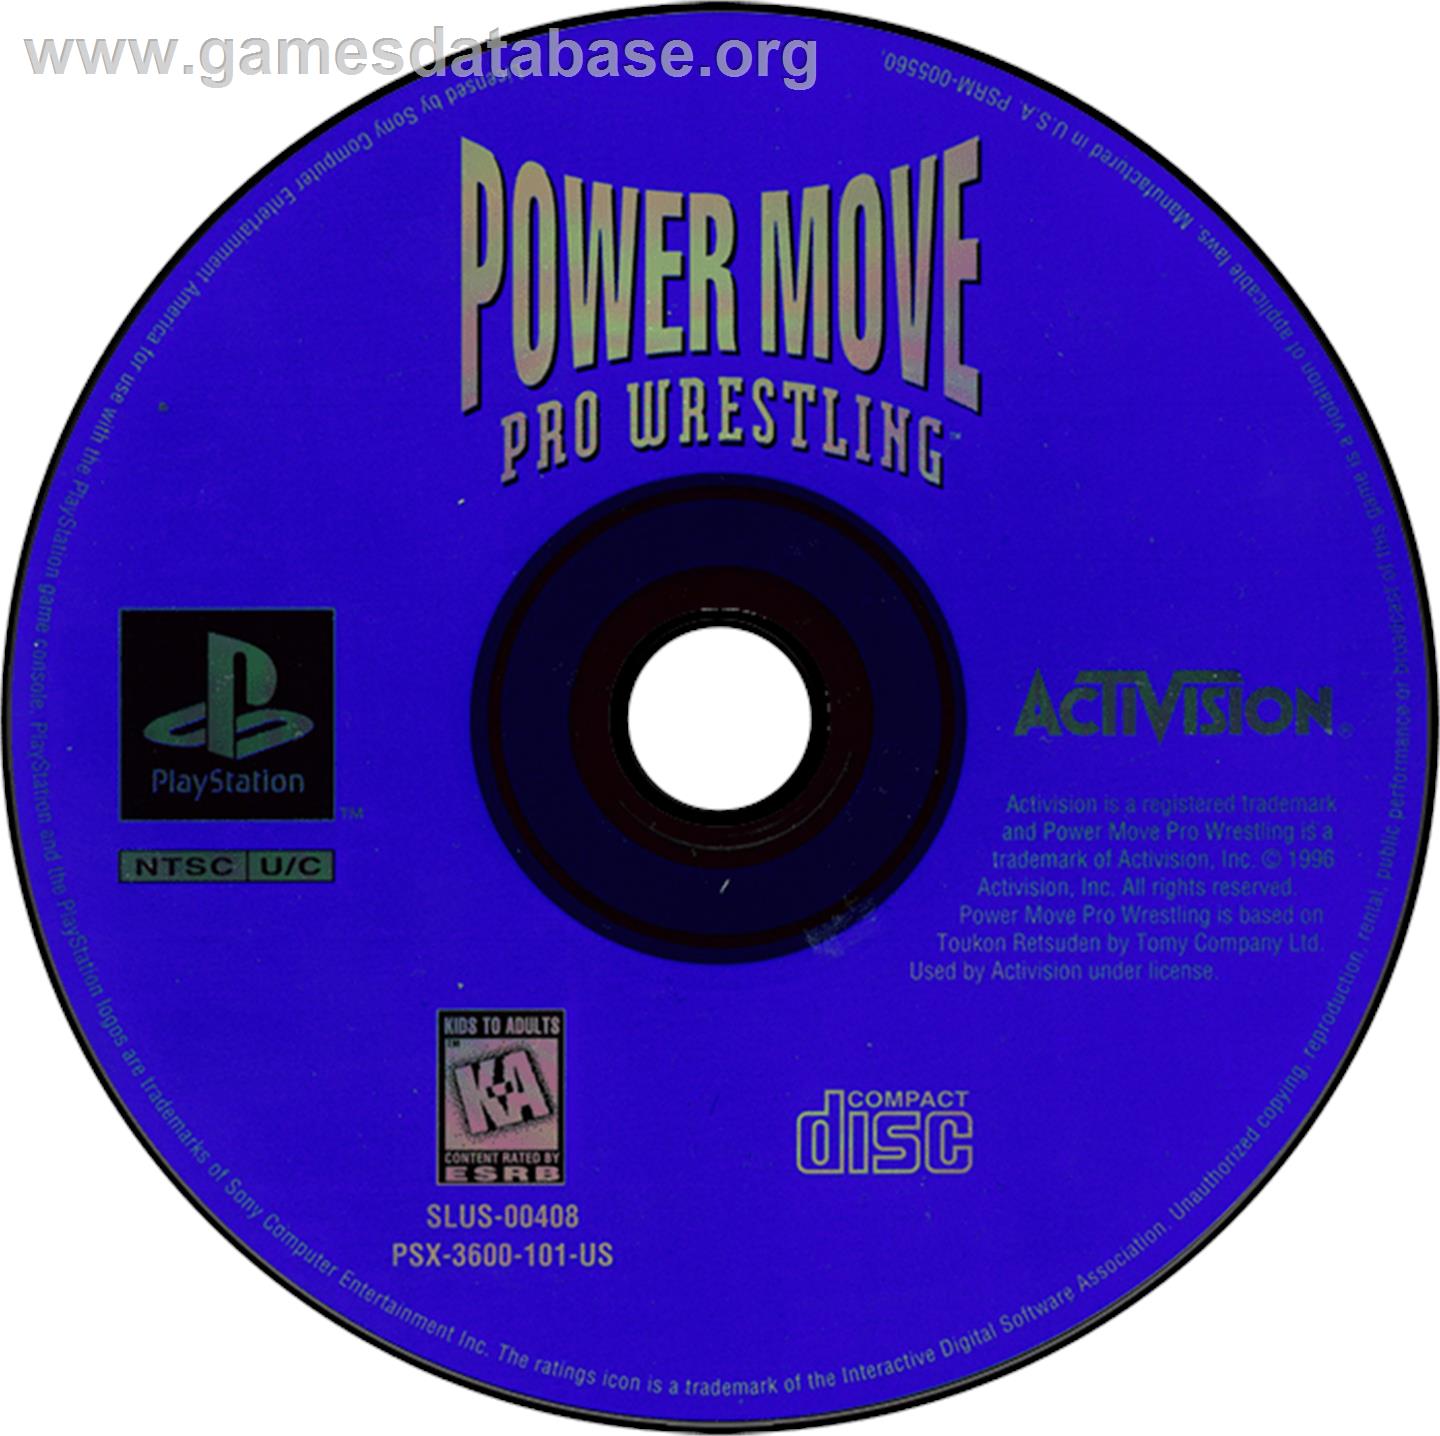 Power Move Pro Wrestling - Sony Playstation - Artwork - Disc